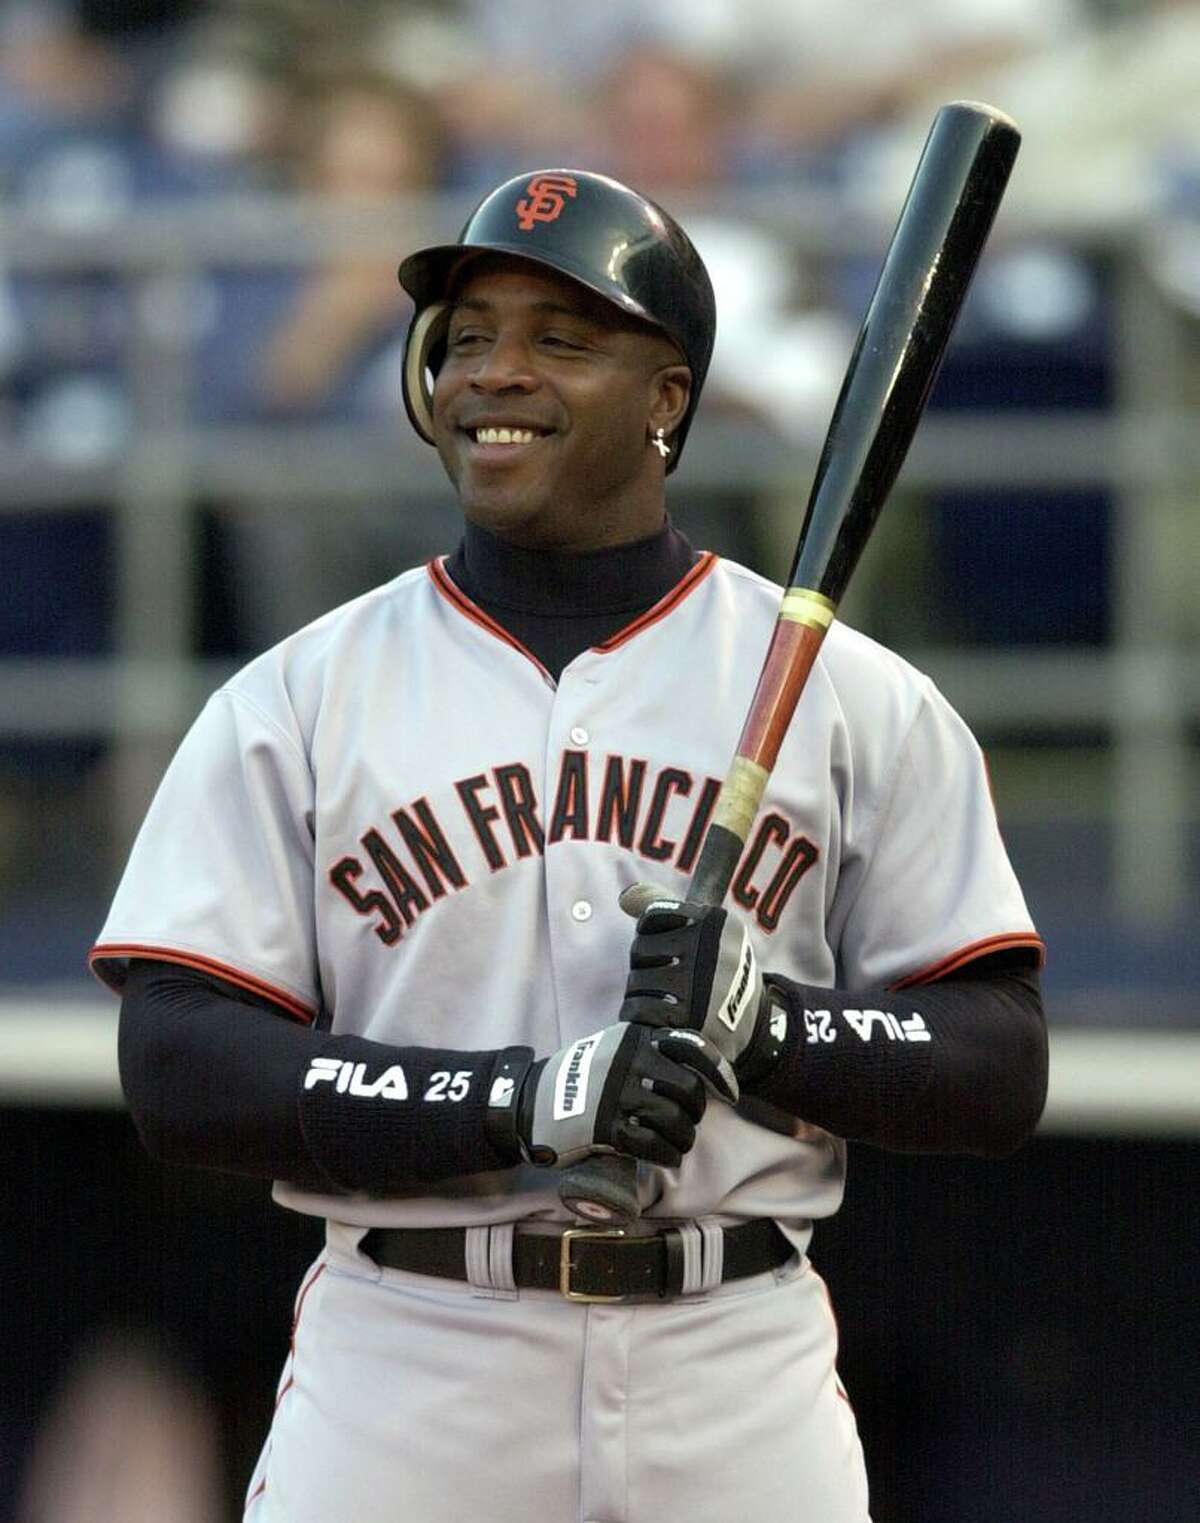 ** ADVANCE FOR WEEKEND EDITIONS, JUNE 15-16 -- FILE --** San Francisco Giants' Barry Bonds sports a big grin as he is intentionally walked in the first inning of the Giants game against the San Diego Padres in San Diego, in this June 3, 2002 photo. In 1998, Arizona manager Buck Showalter considered Bonds such a threat that he had him intentionally walked with the bases loaded. And that was years before Barry Bonds broke the single-season home run record.(AP Photo/Denis Poroy)